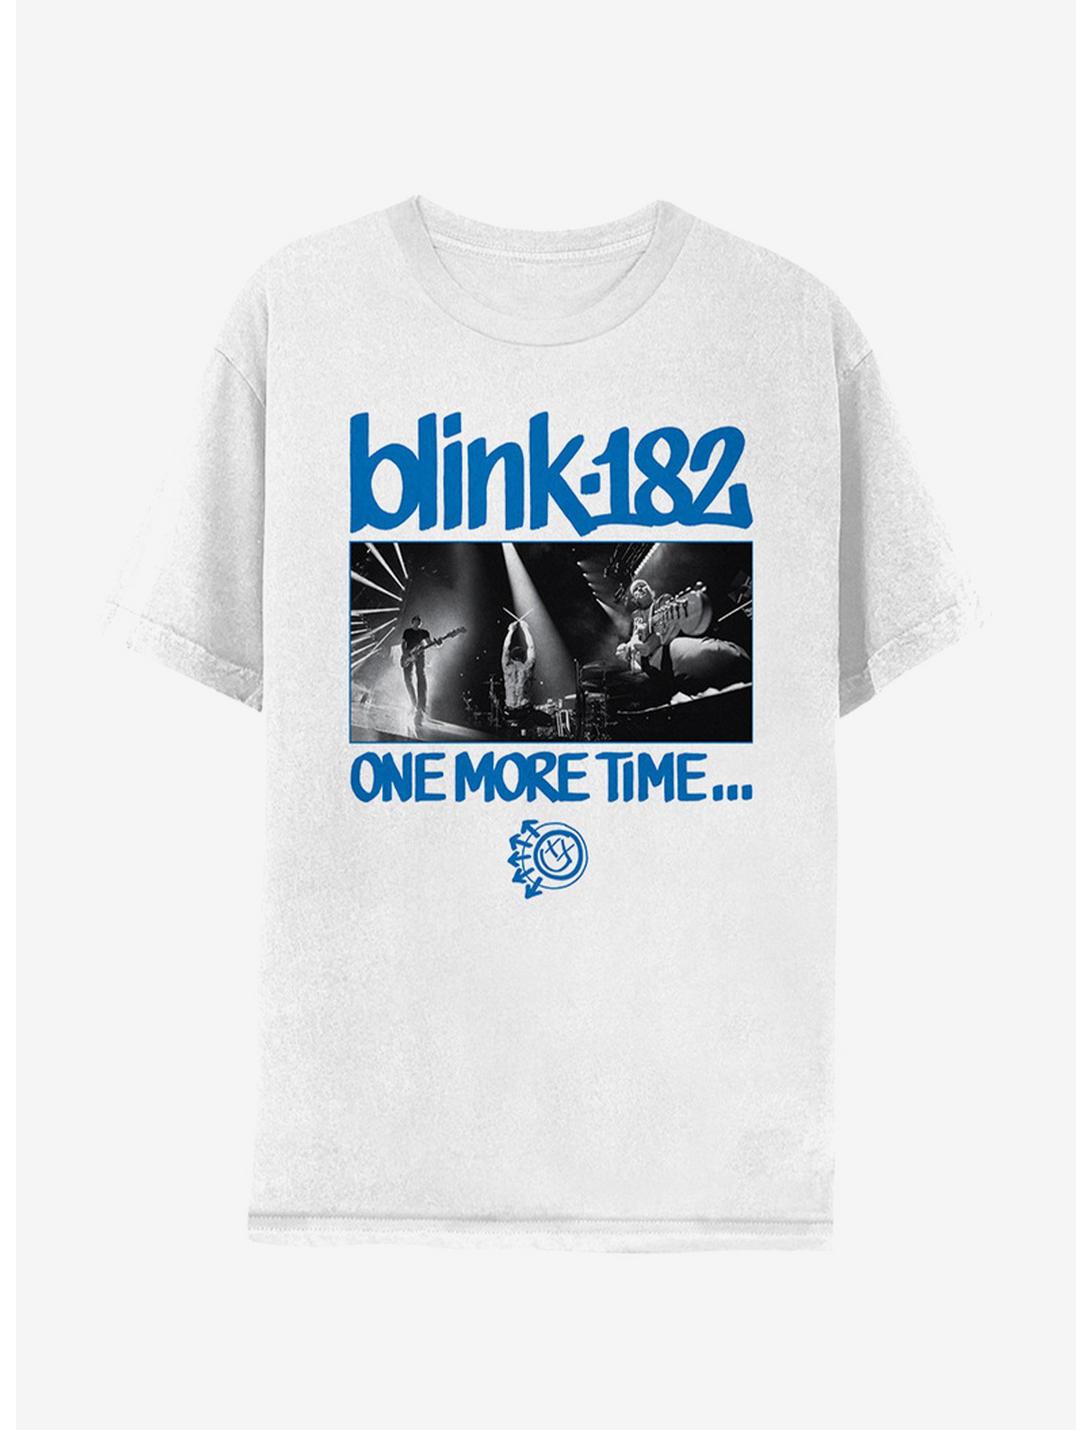 Blink-182 One More Time T-Shirt, BRIGHT WHITE, hi-res